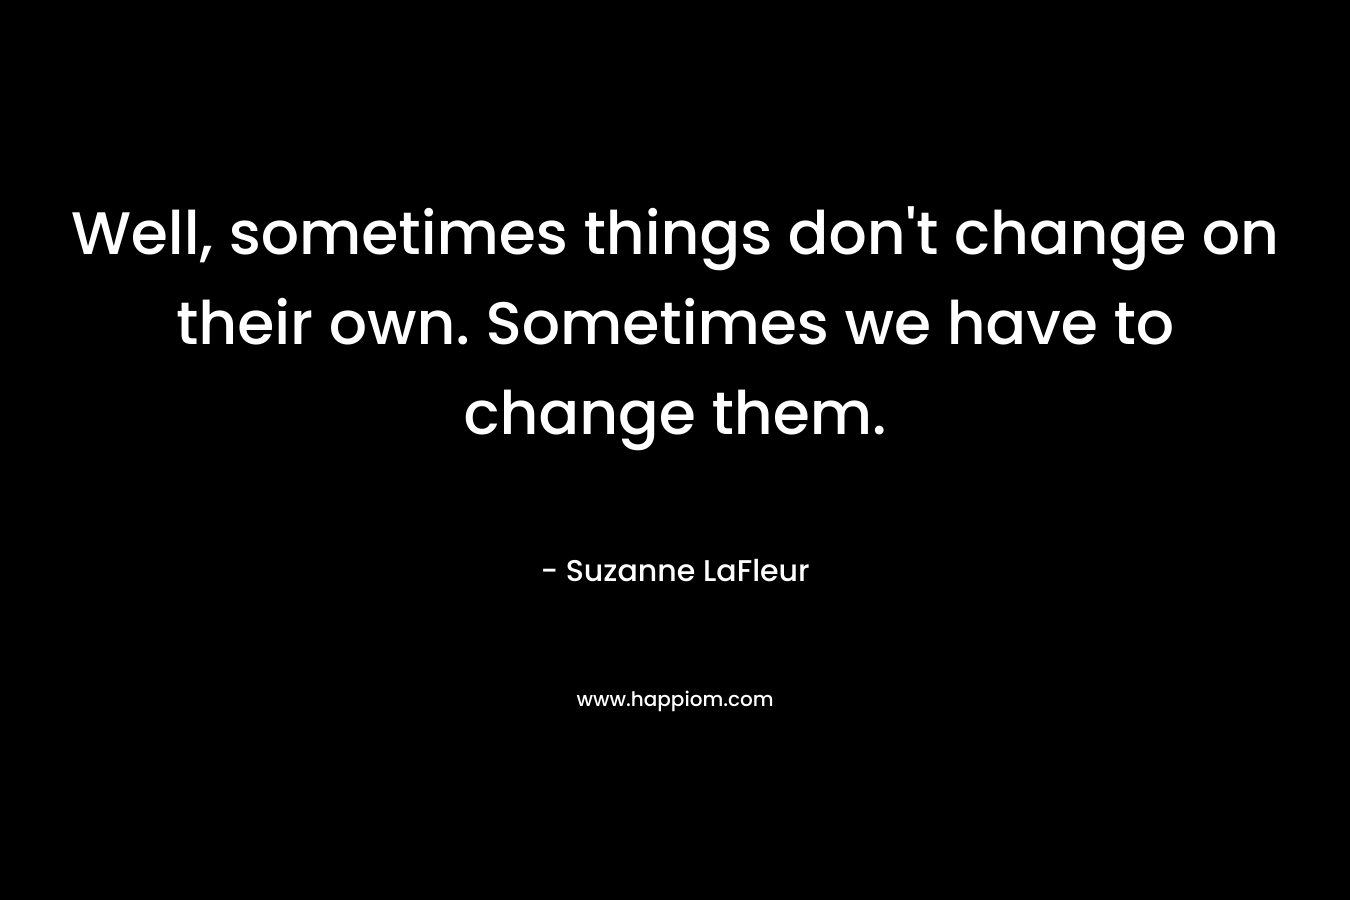 Well, sometimes things don't change on their own. Sometimes we have to change them.